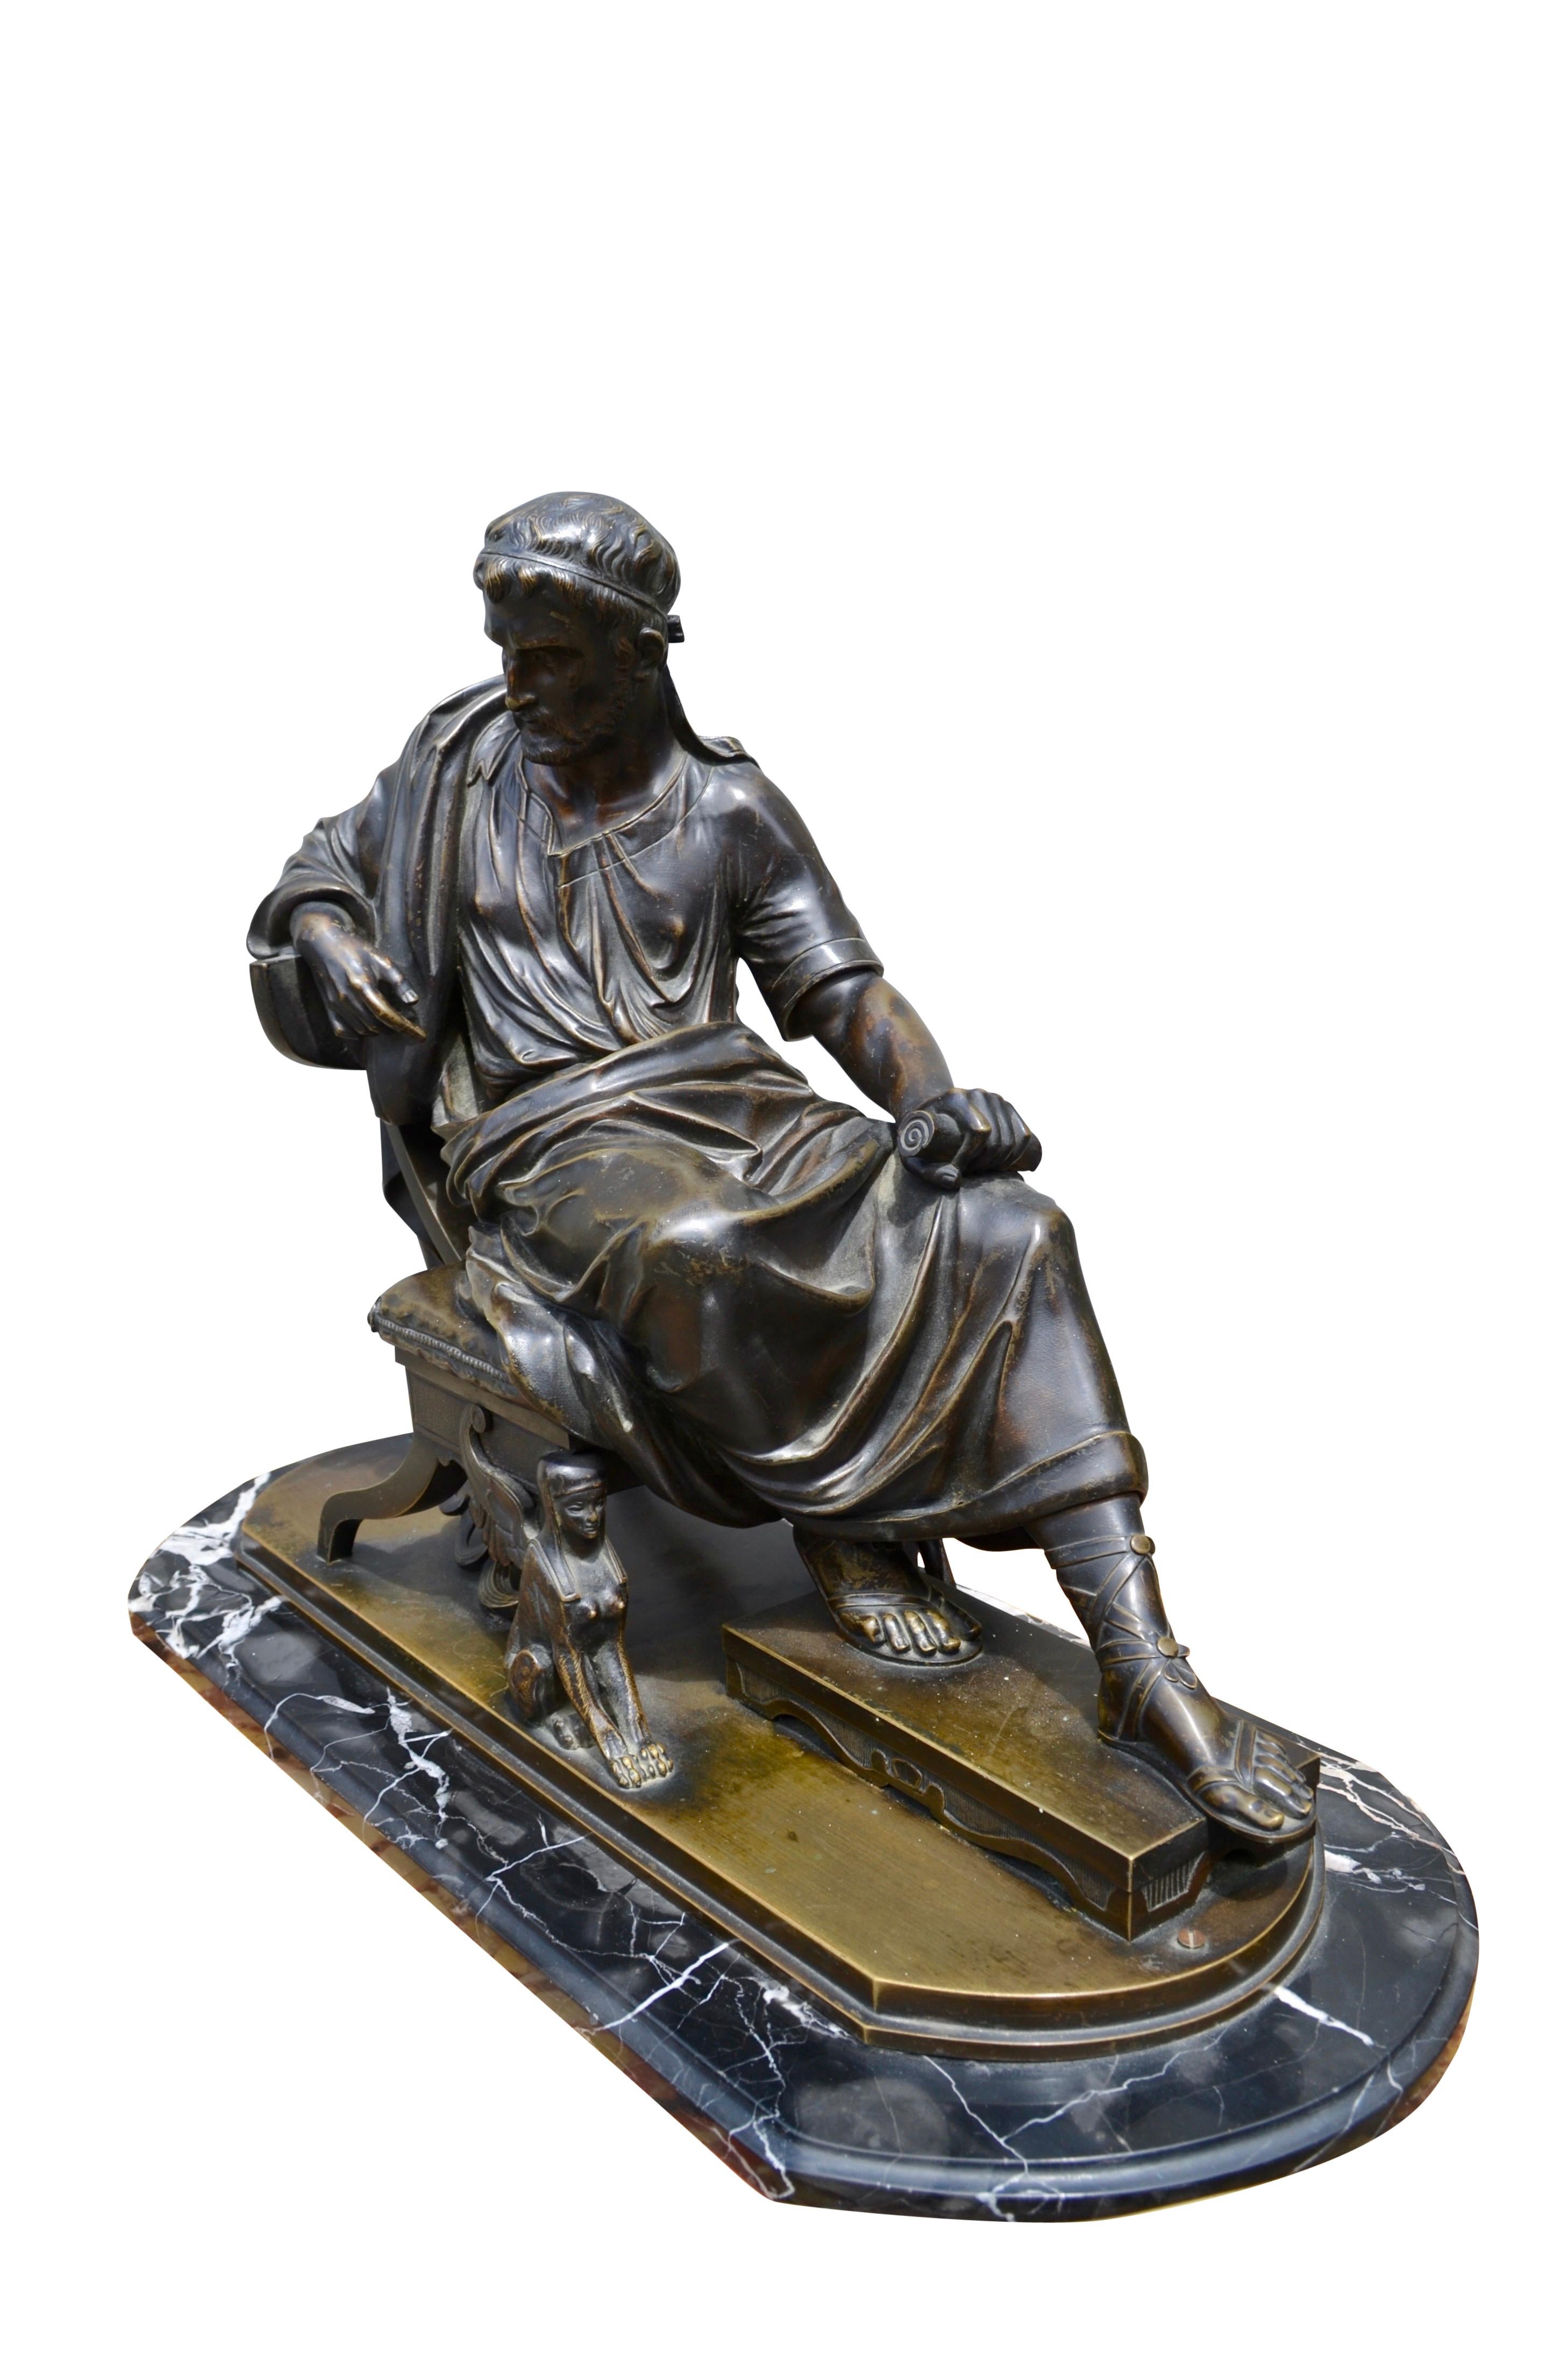 Neoclassical Patinated Bronze Grand Tour Statue of a Seated Roman Senator or Philosopher